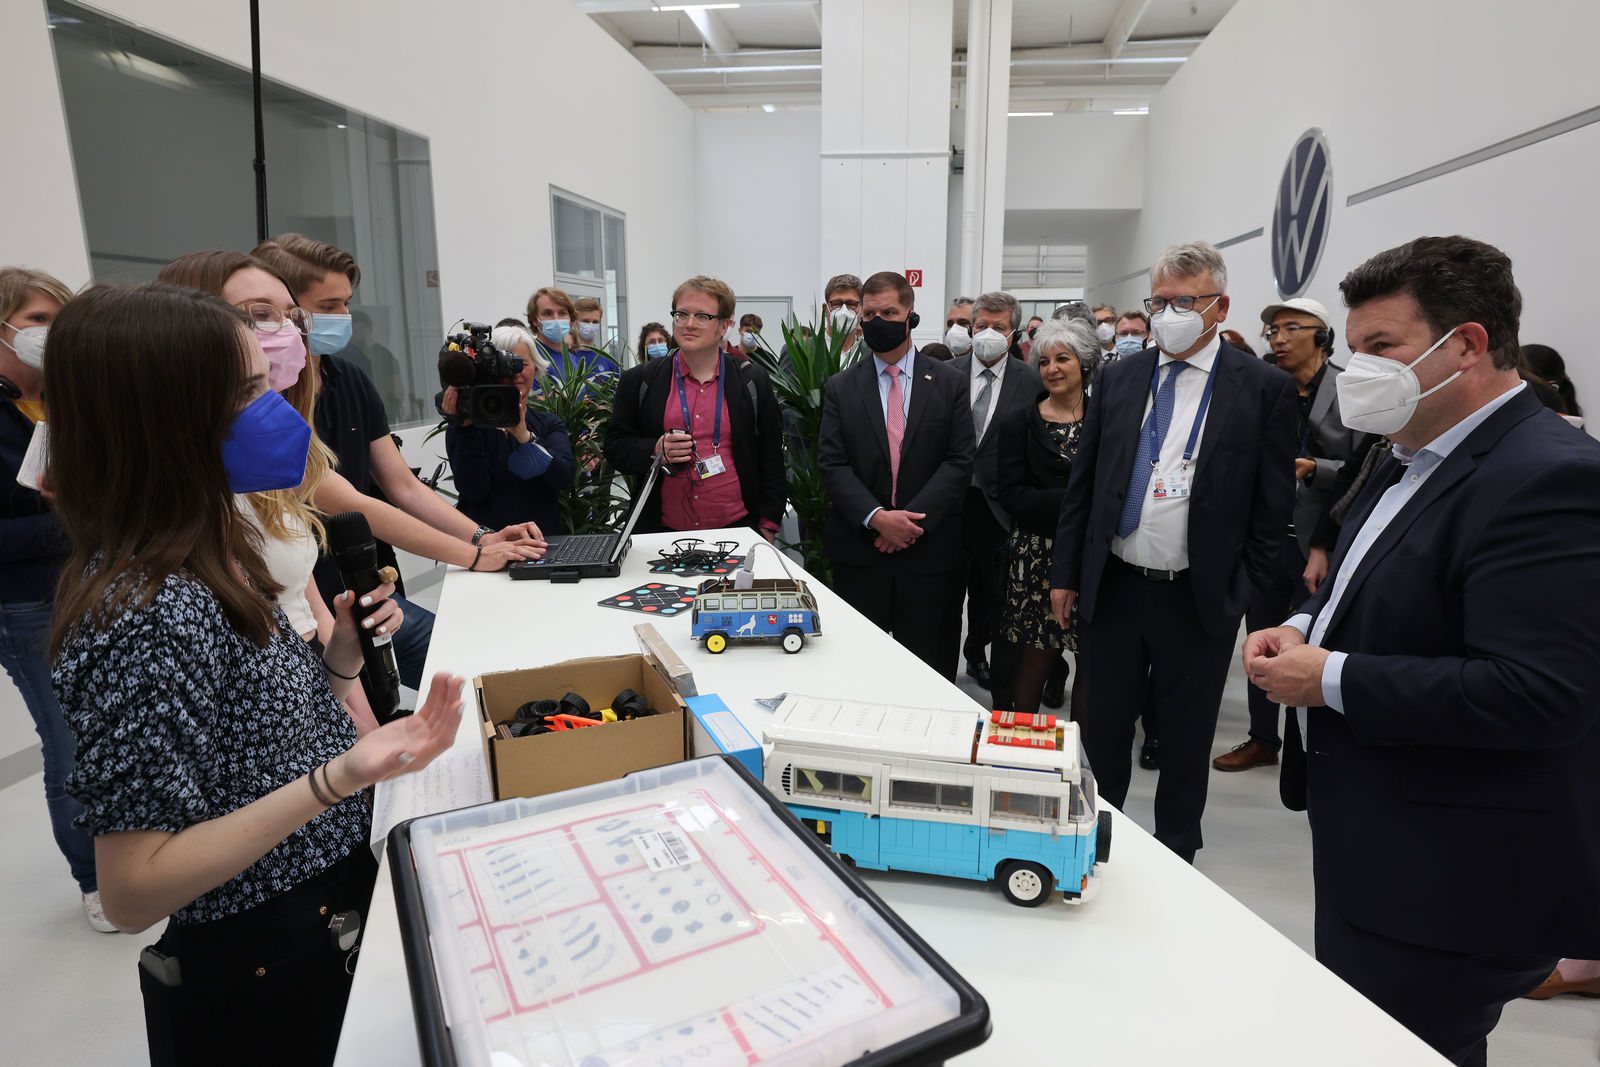 G7 labor and social ministers learn about the transformation to e-mobility at Volkswagen